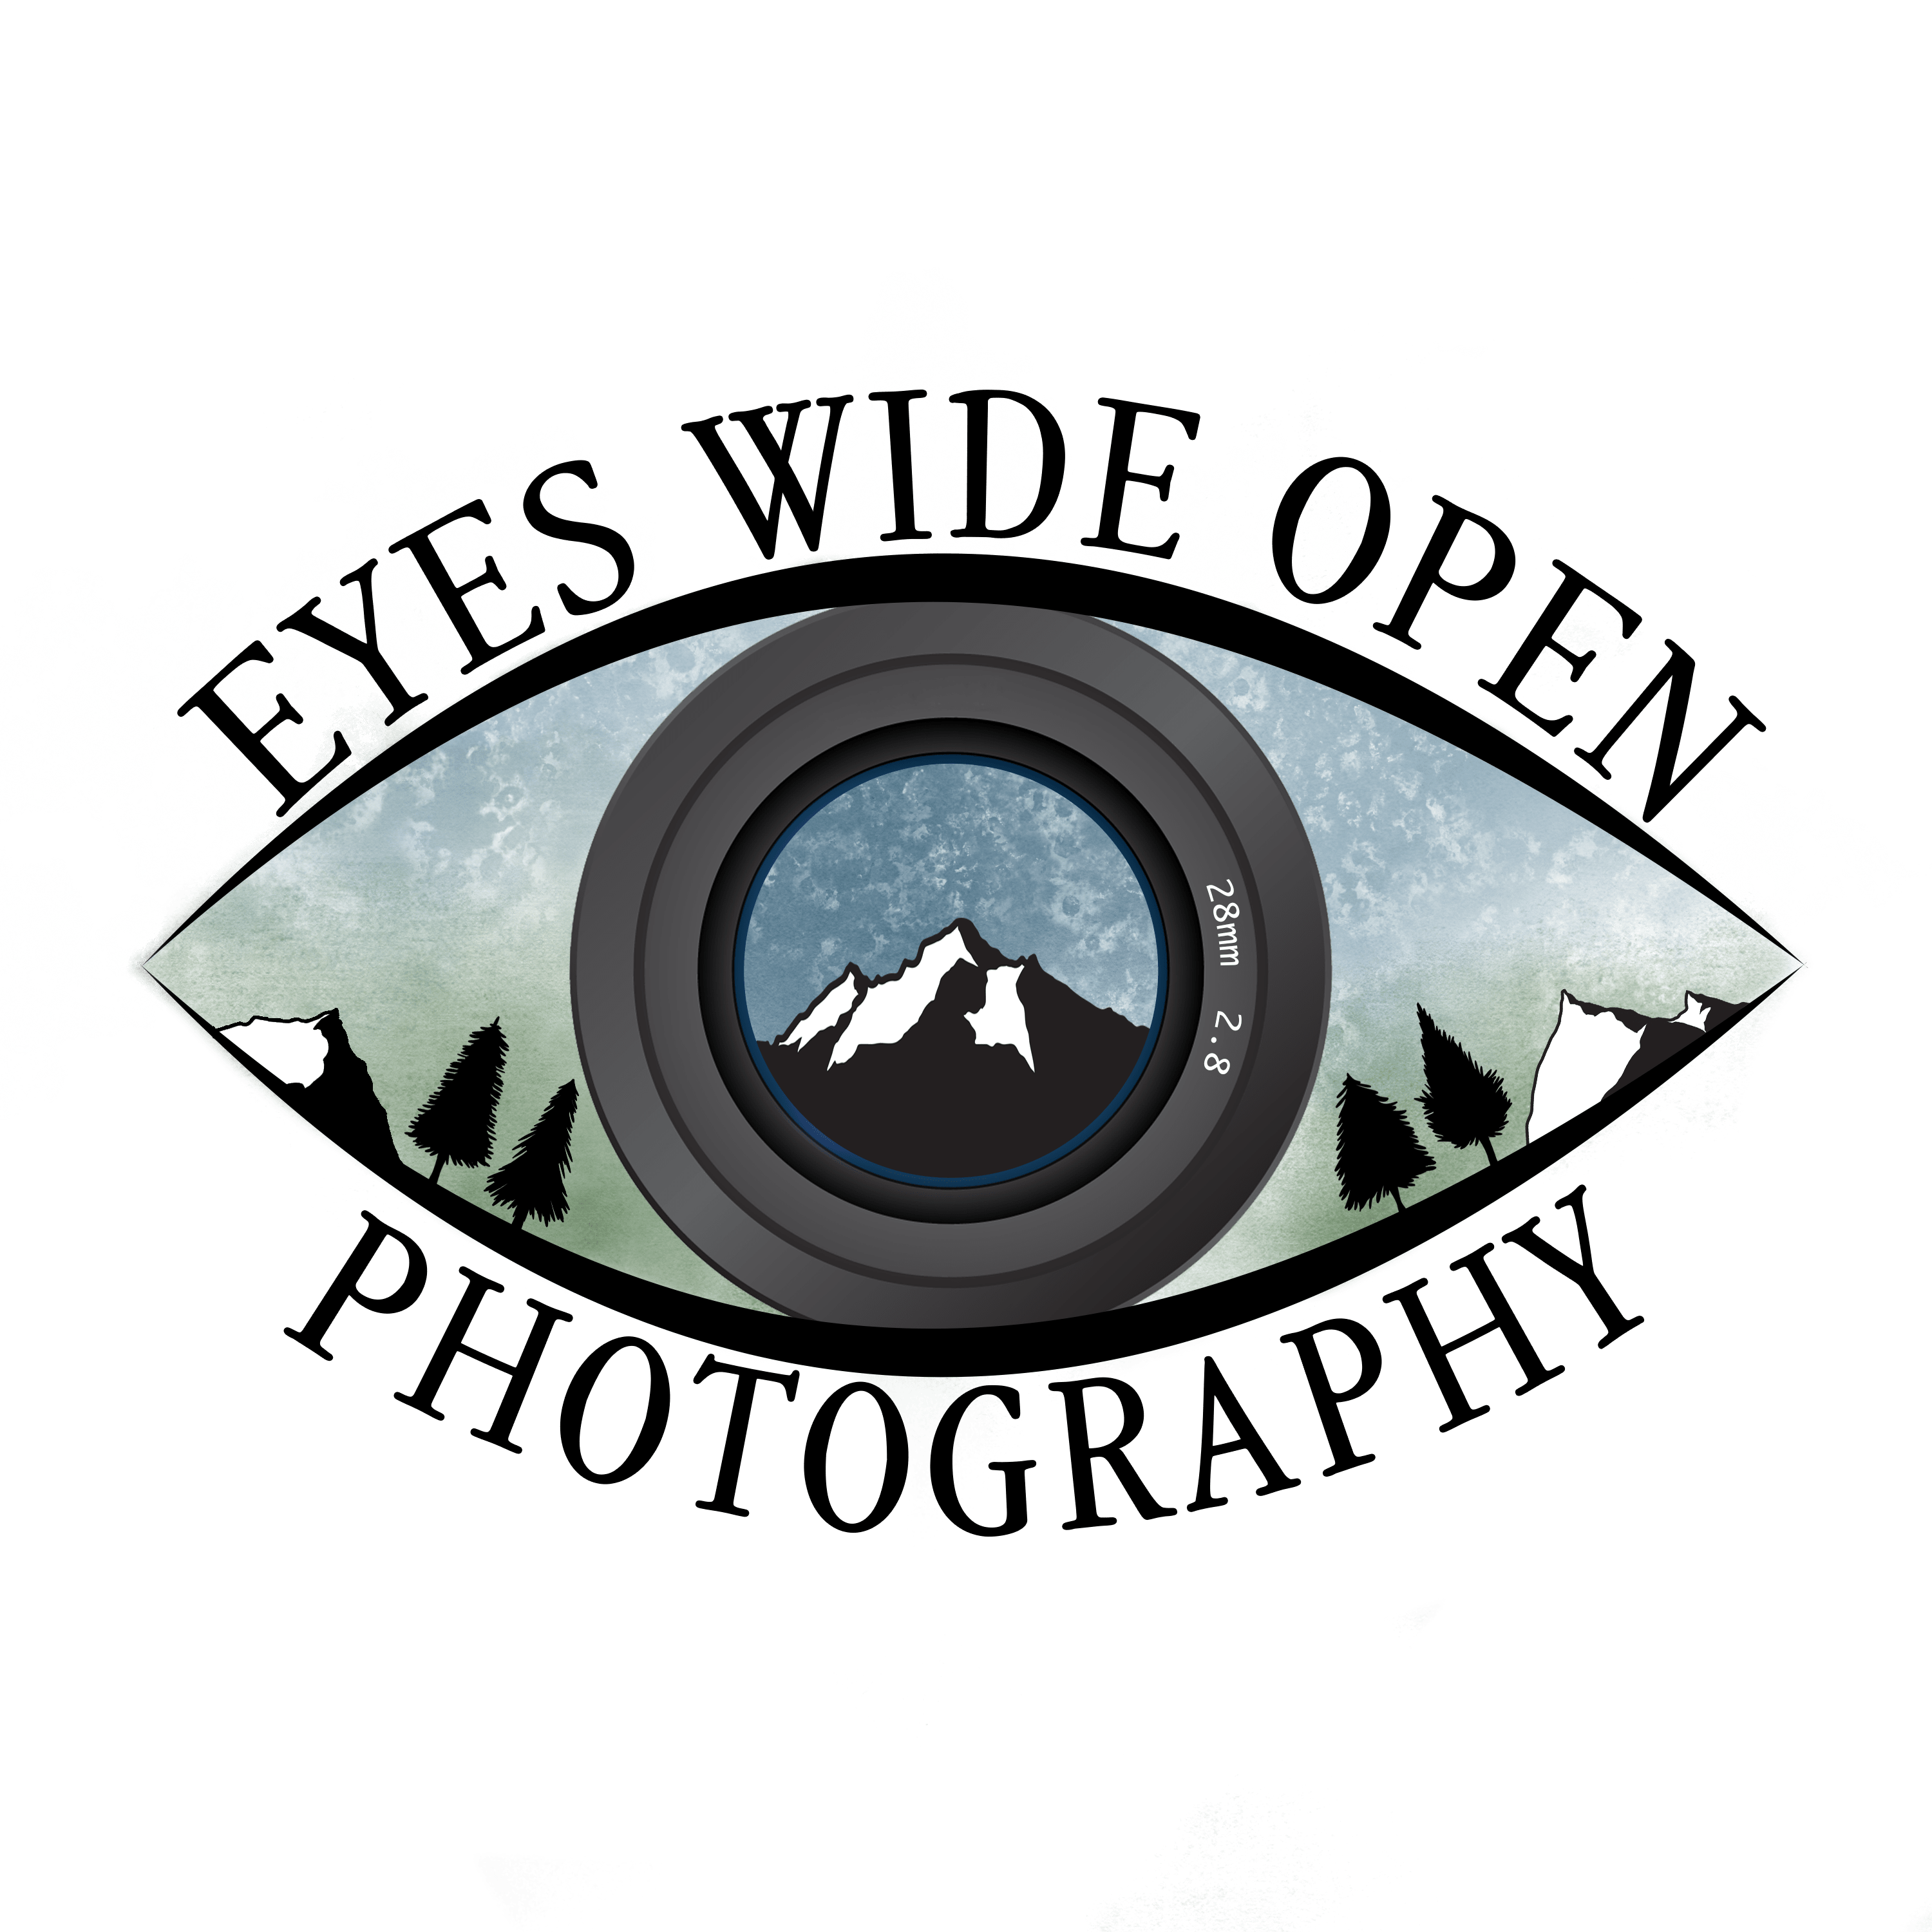 Eyes Wide Open Photography